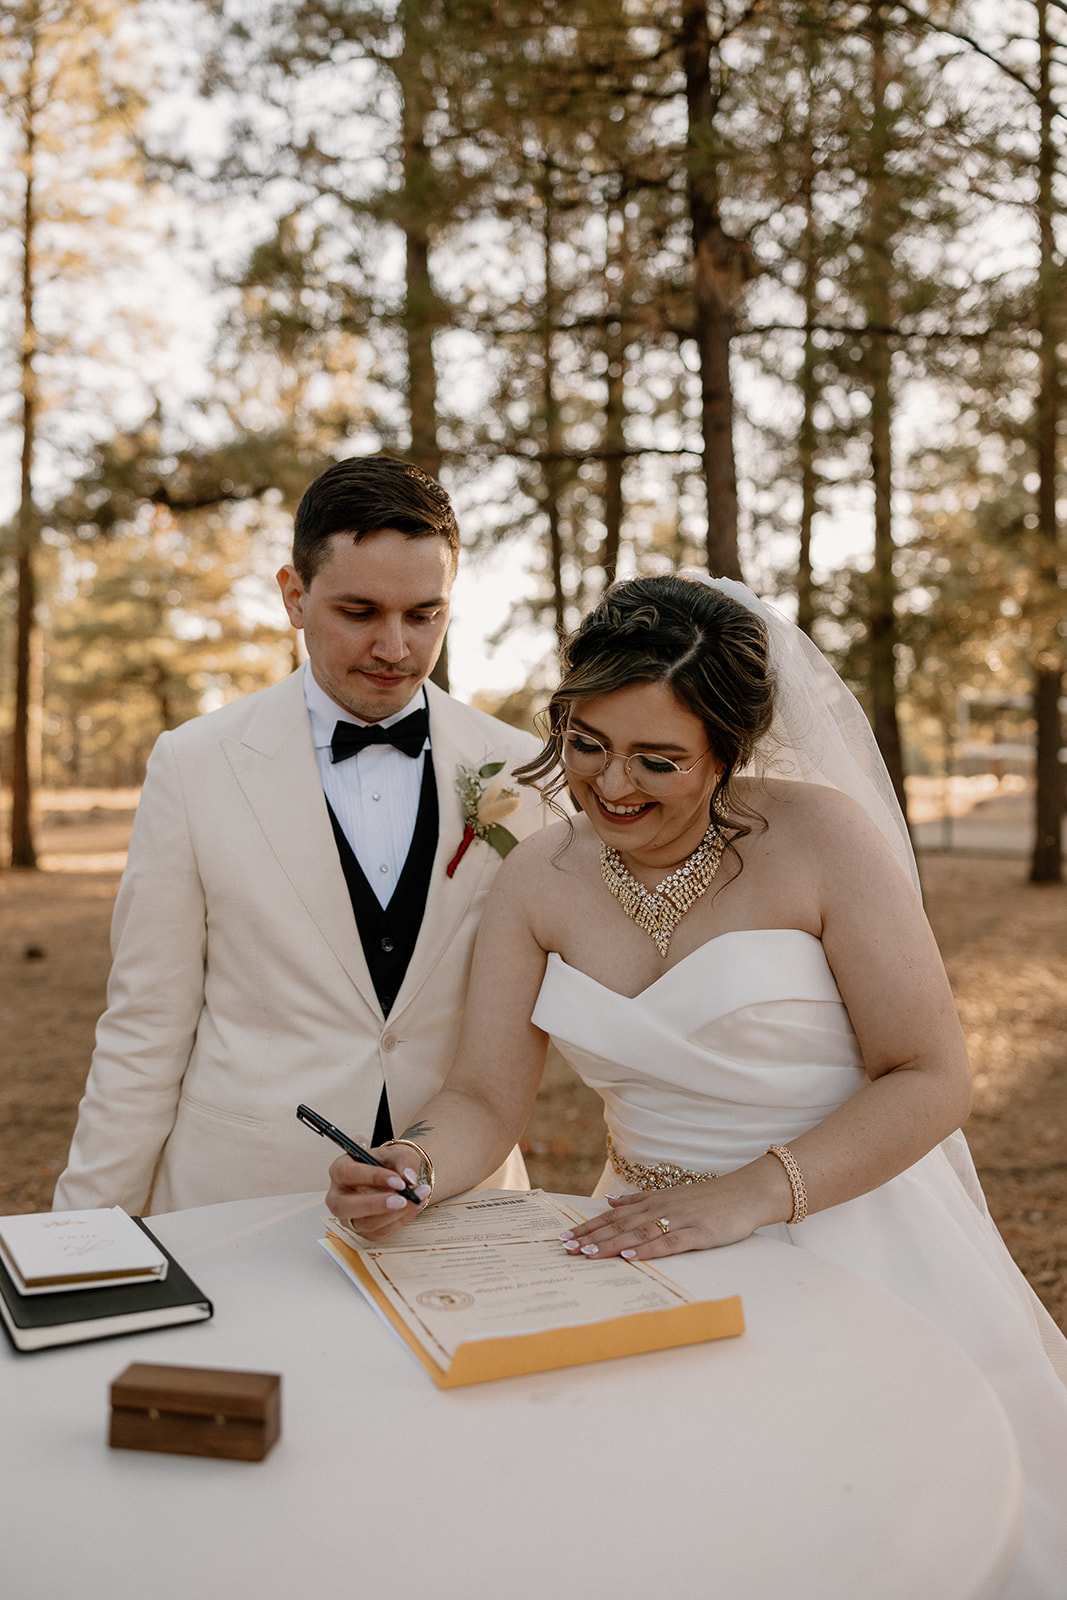 Stunning bride and groom pose together signing their marriage license